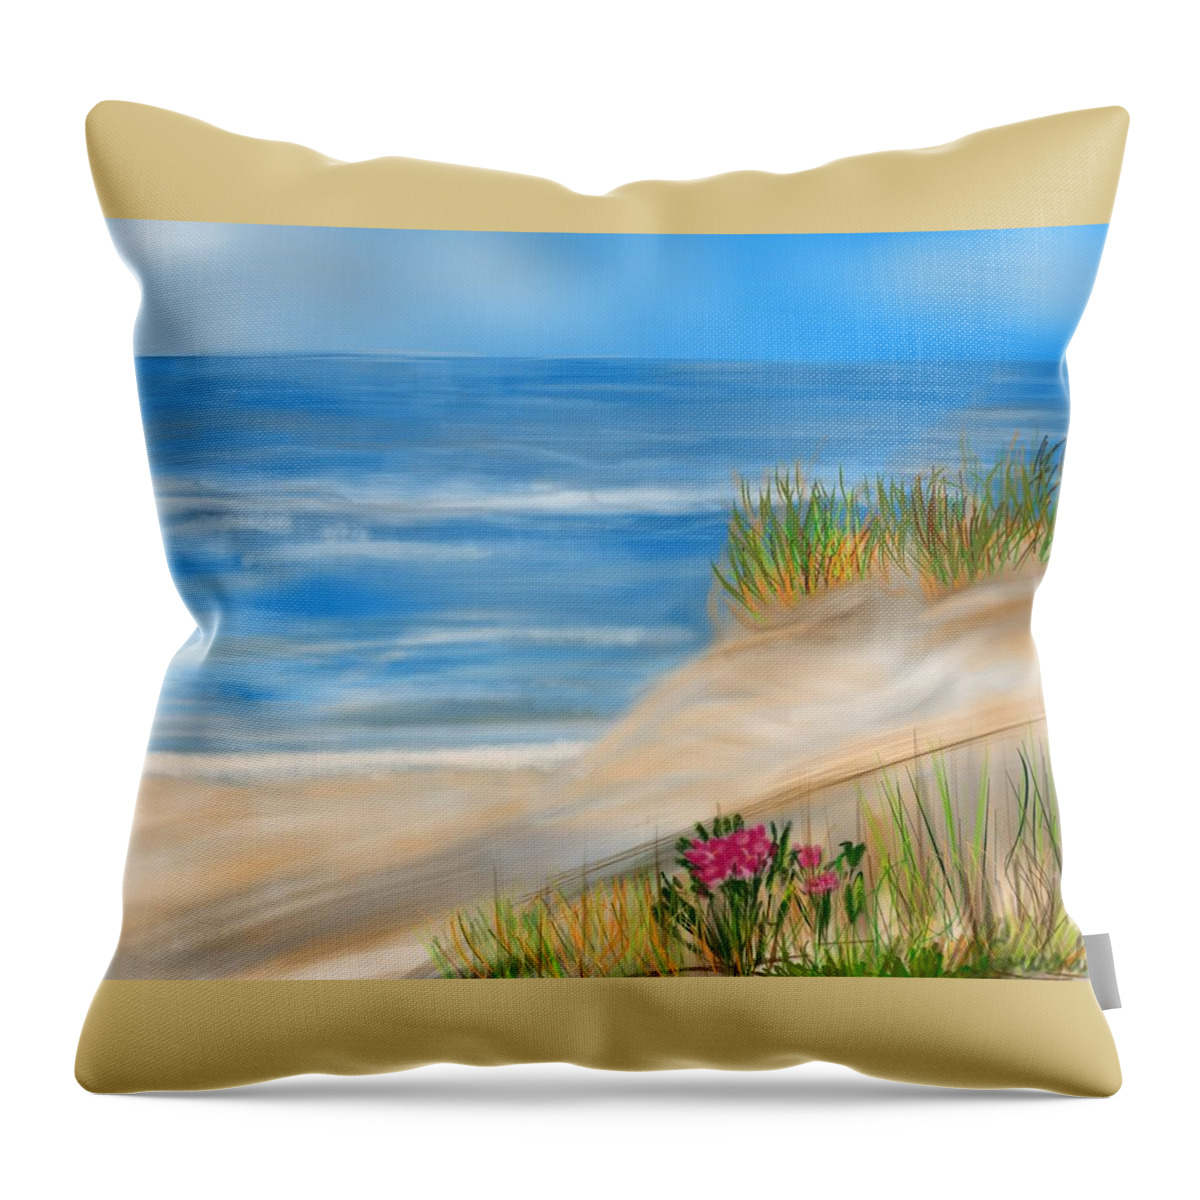 Sandunes Throw Pillow featuring the painting Seaside Dunes by Christine Fournier